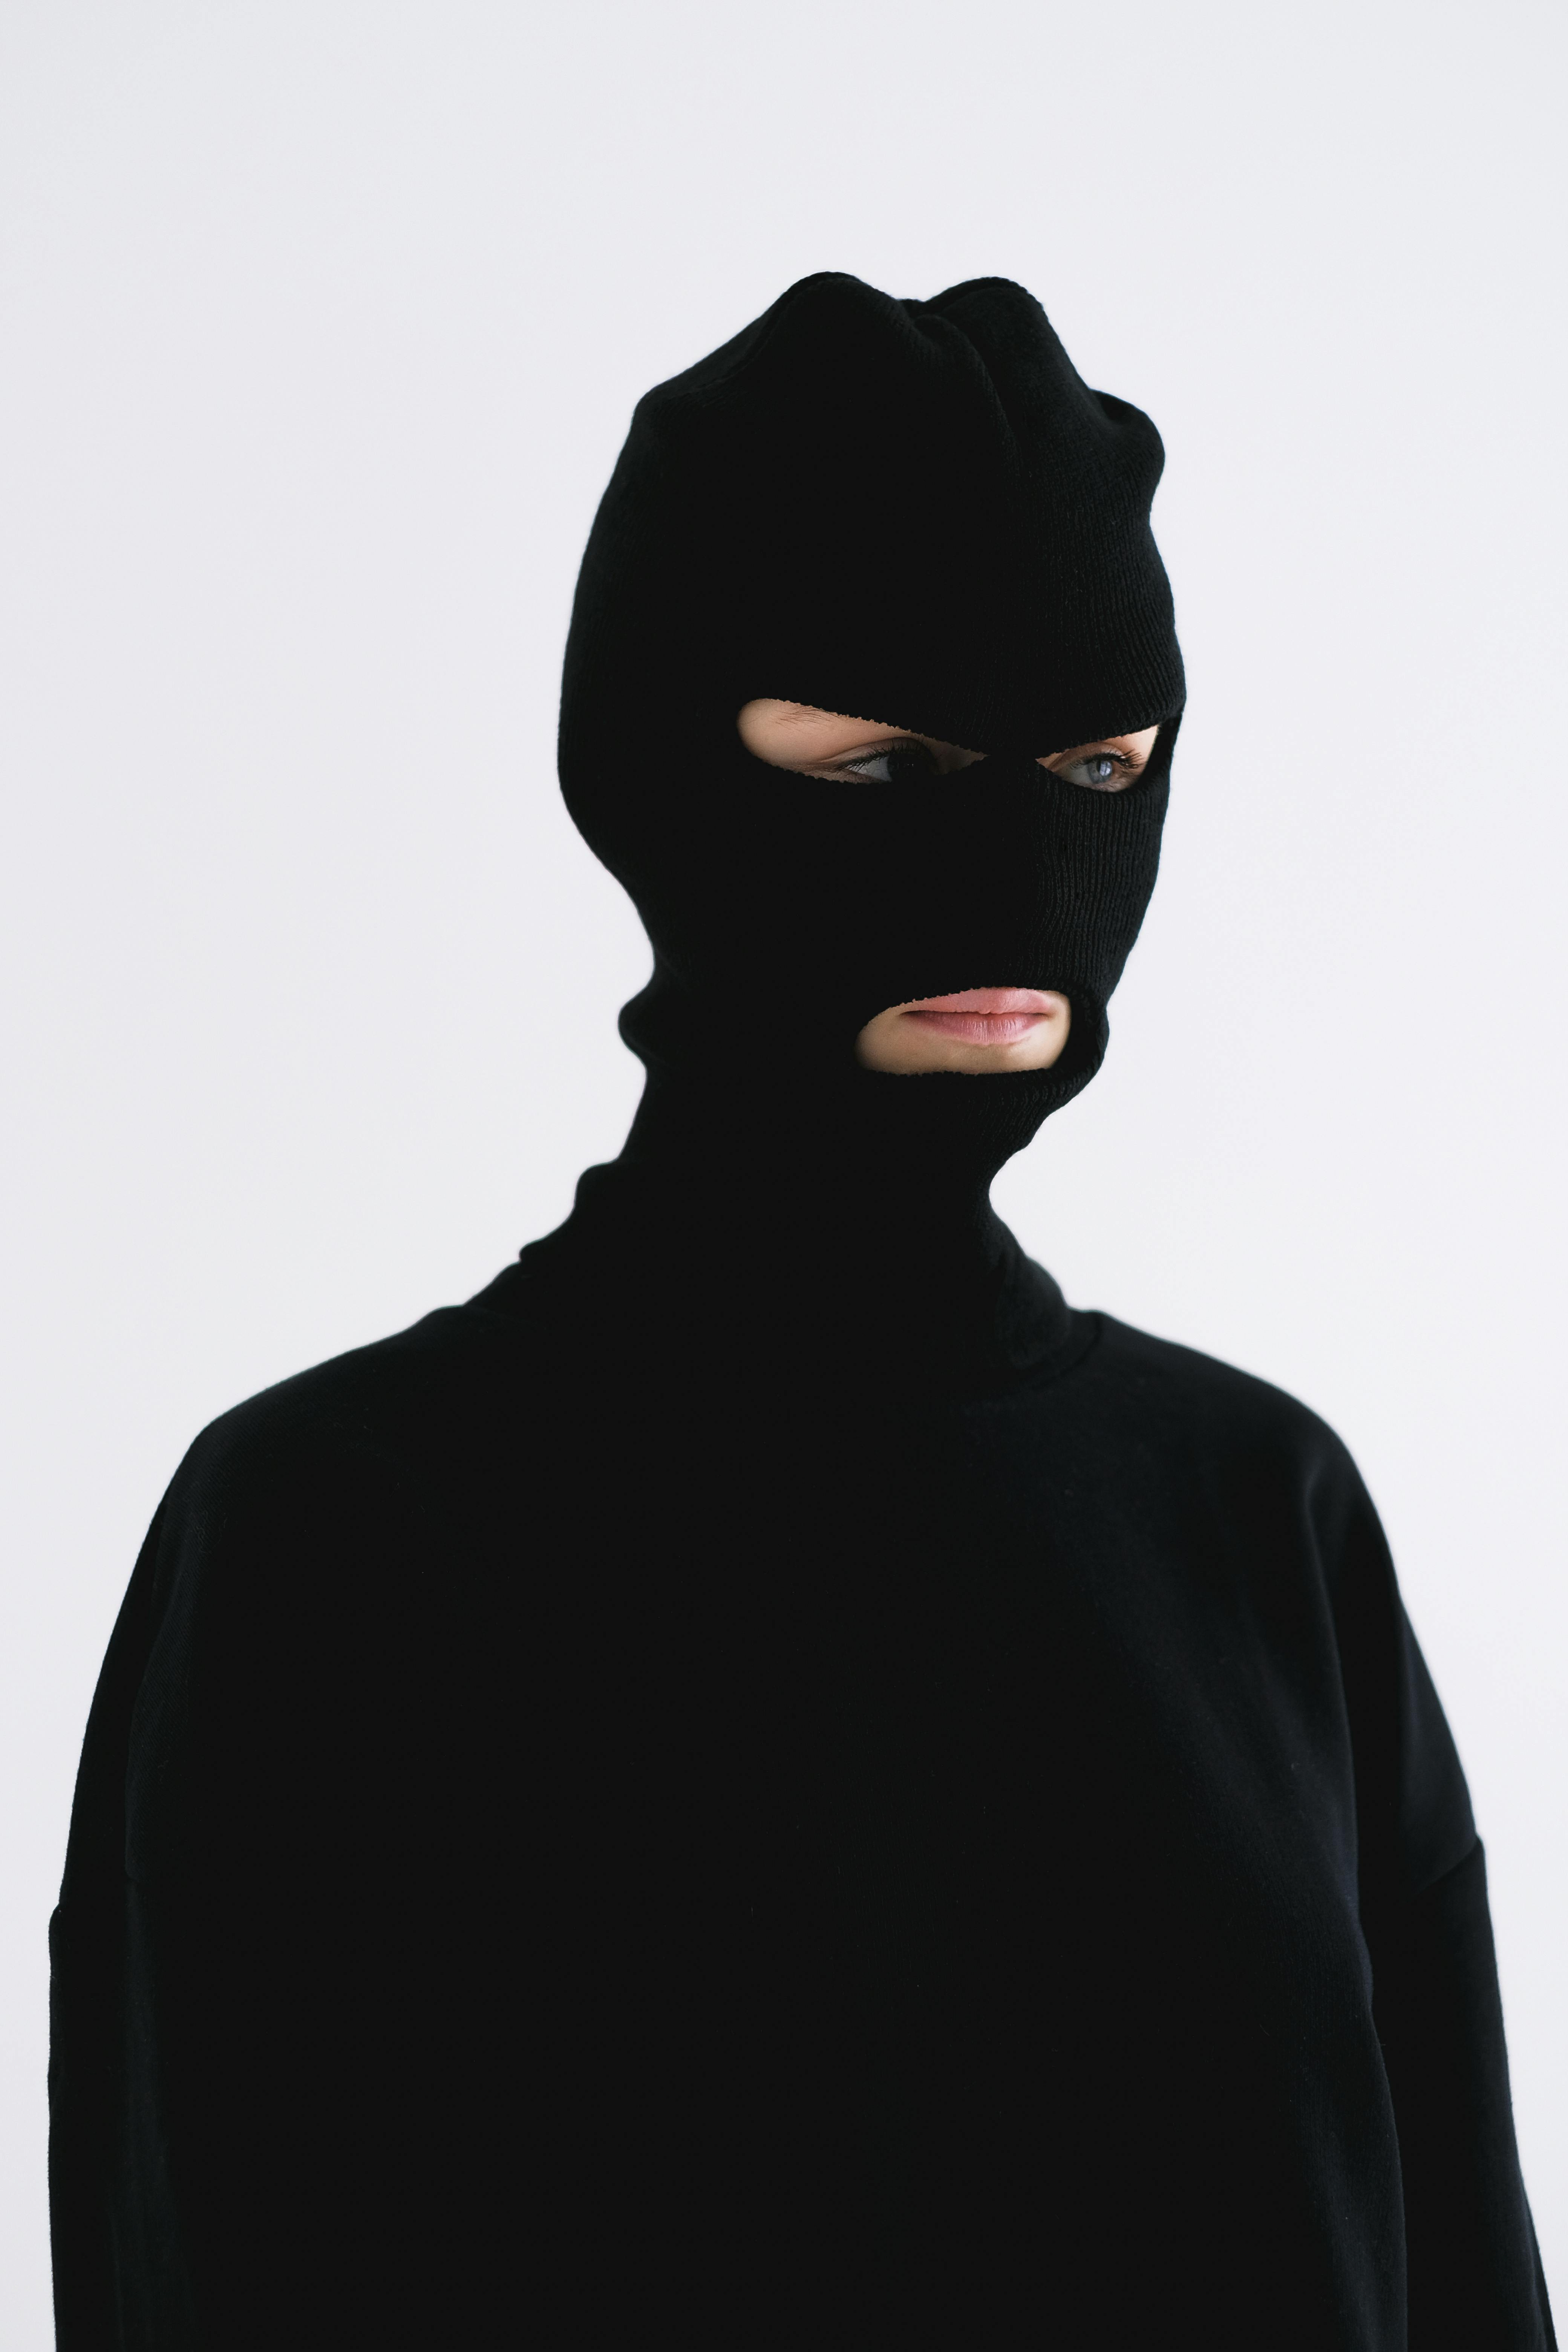 Robber Download The BEST Free Robber Mask Stock & Images